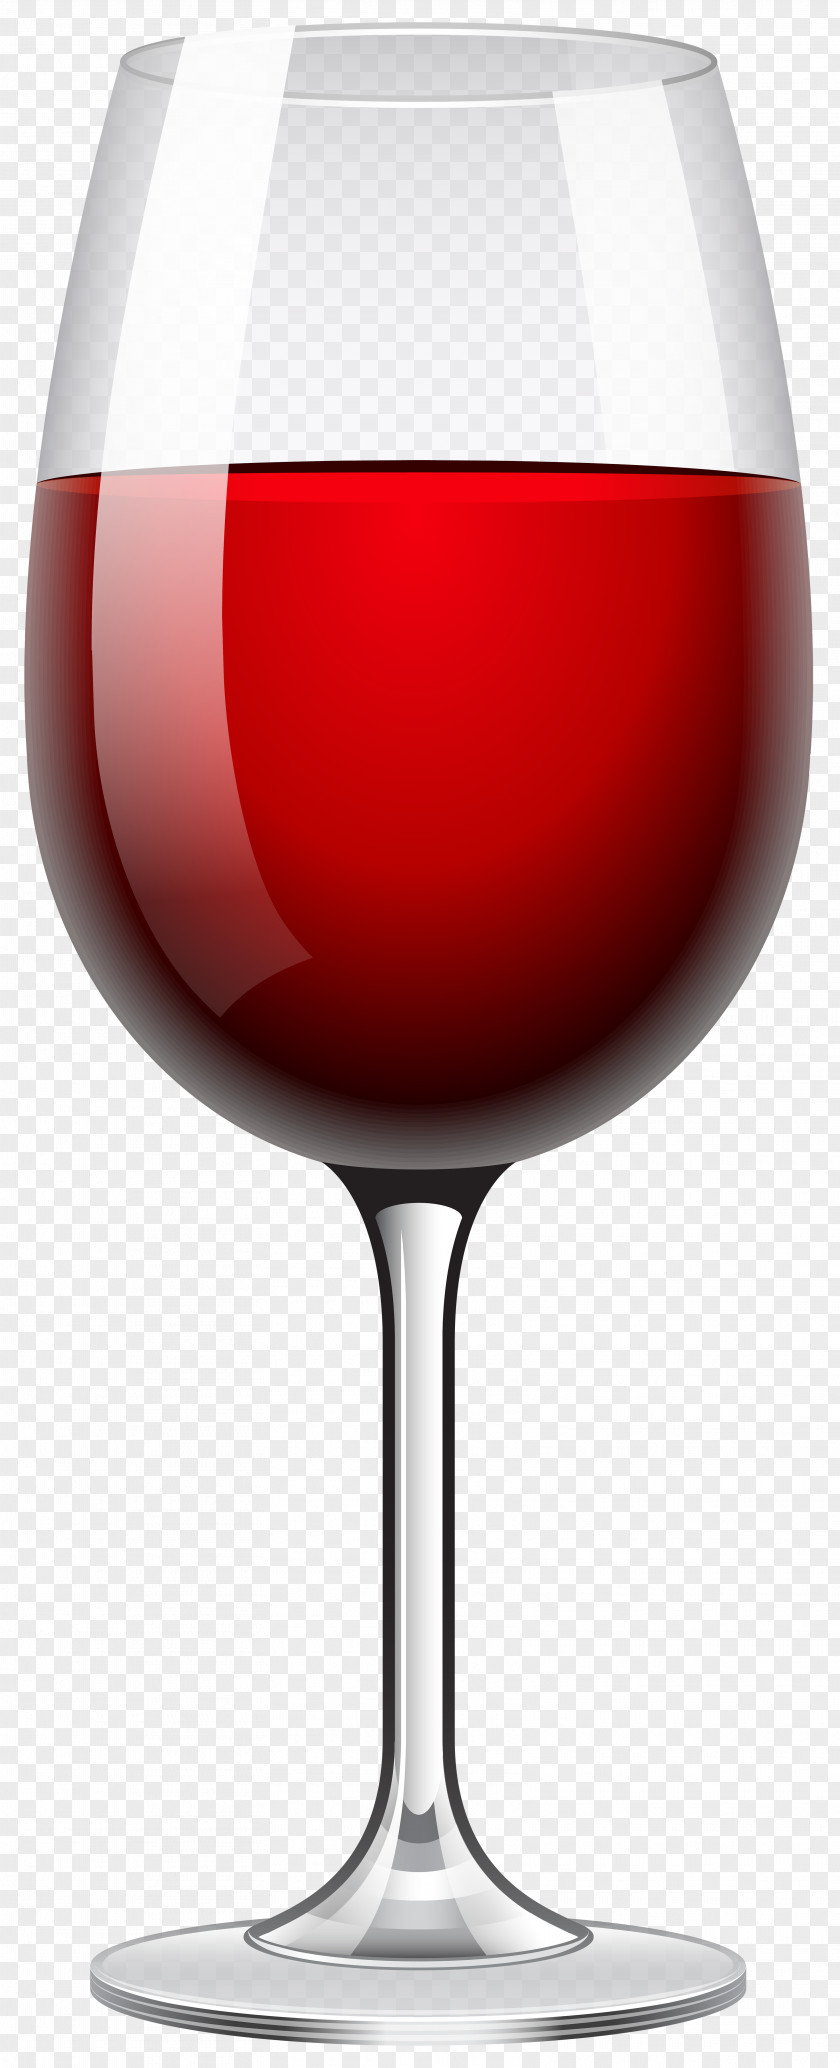 Red Wine Glass Transparent Clip Art Image White Champagne PNG